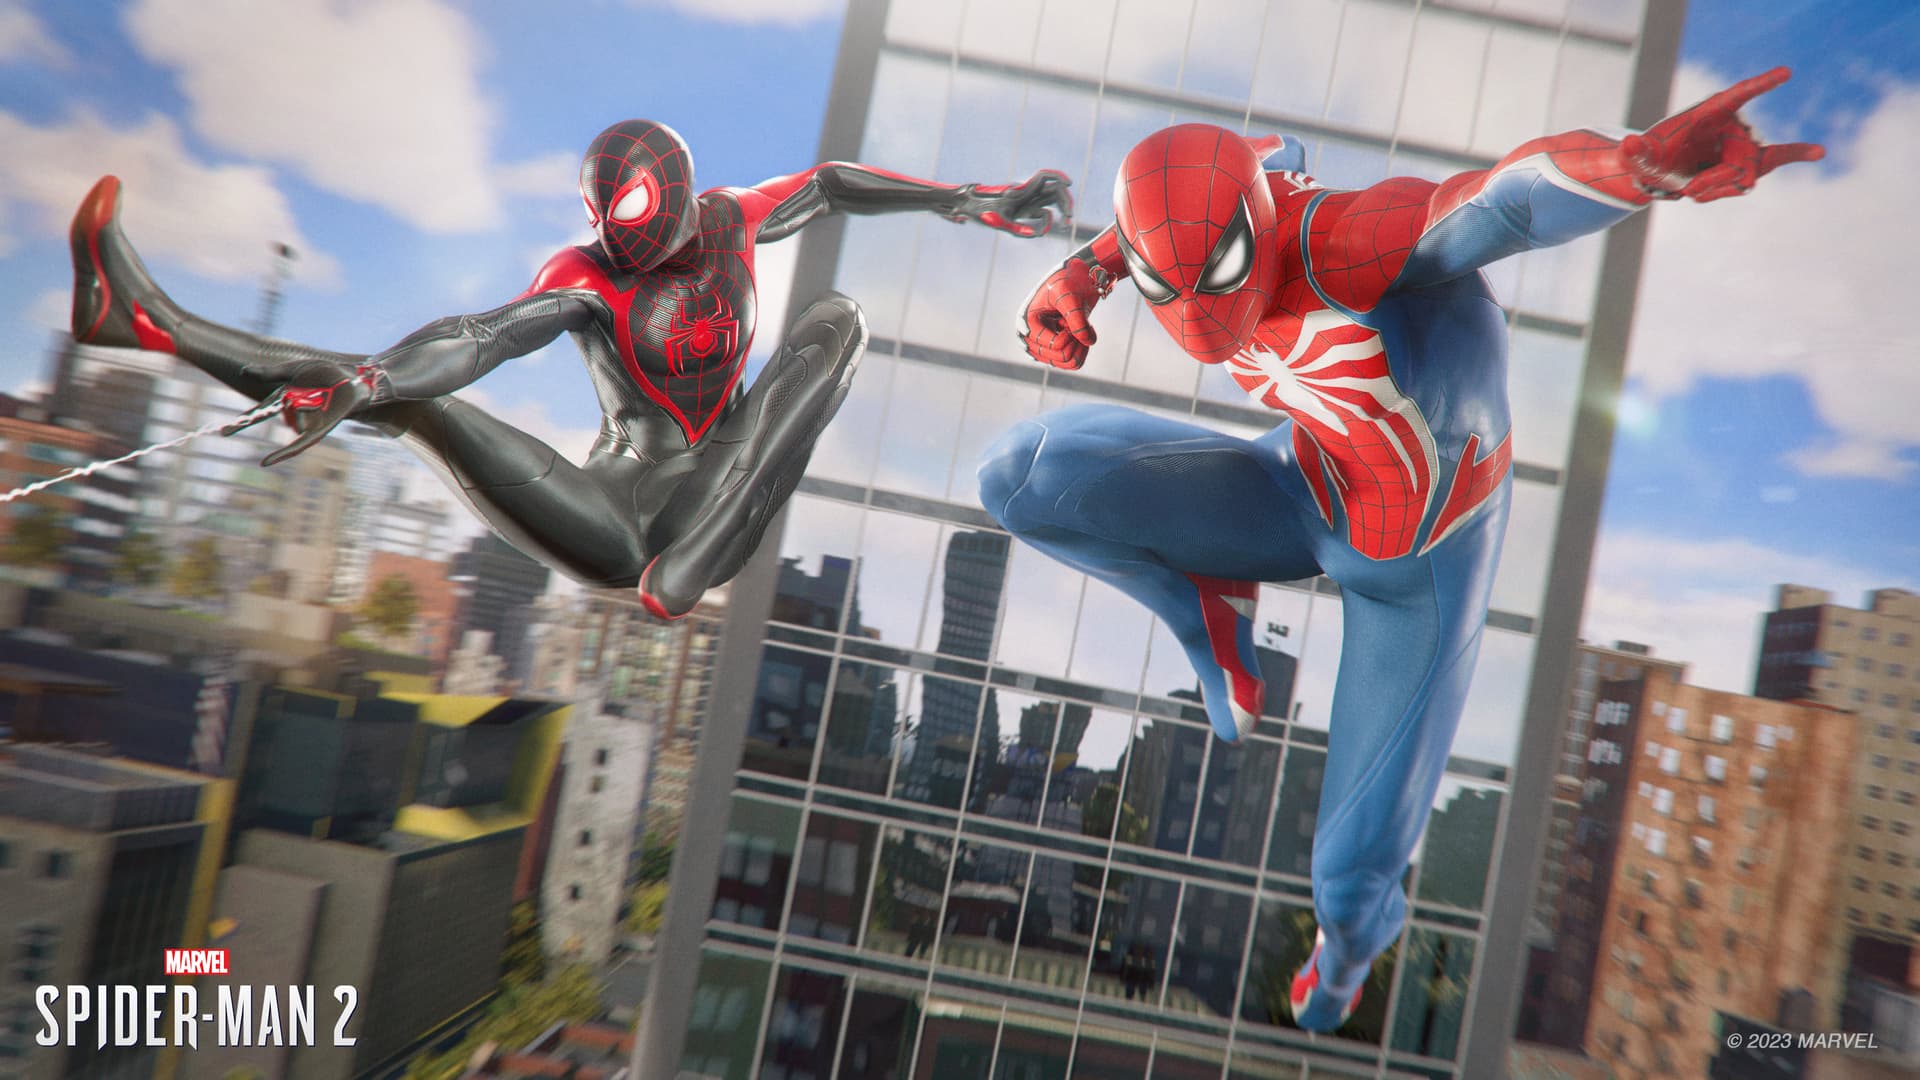 Miles Morales and Peter Parker swing through Marvel's New York in 'Marvel's Spider-Man 2'